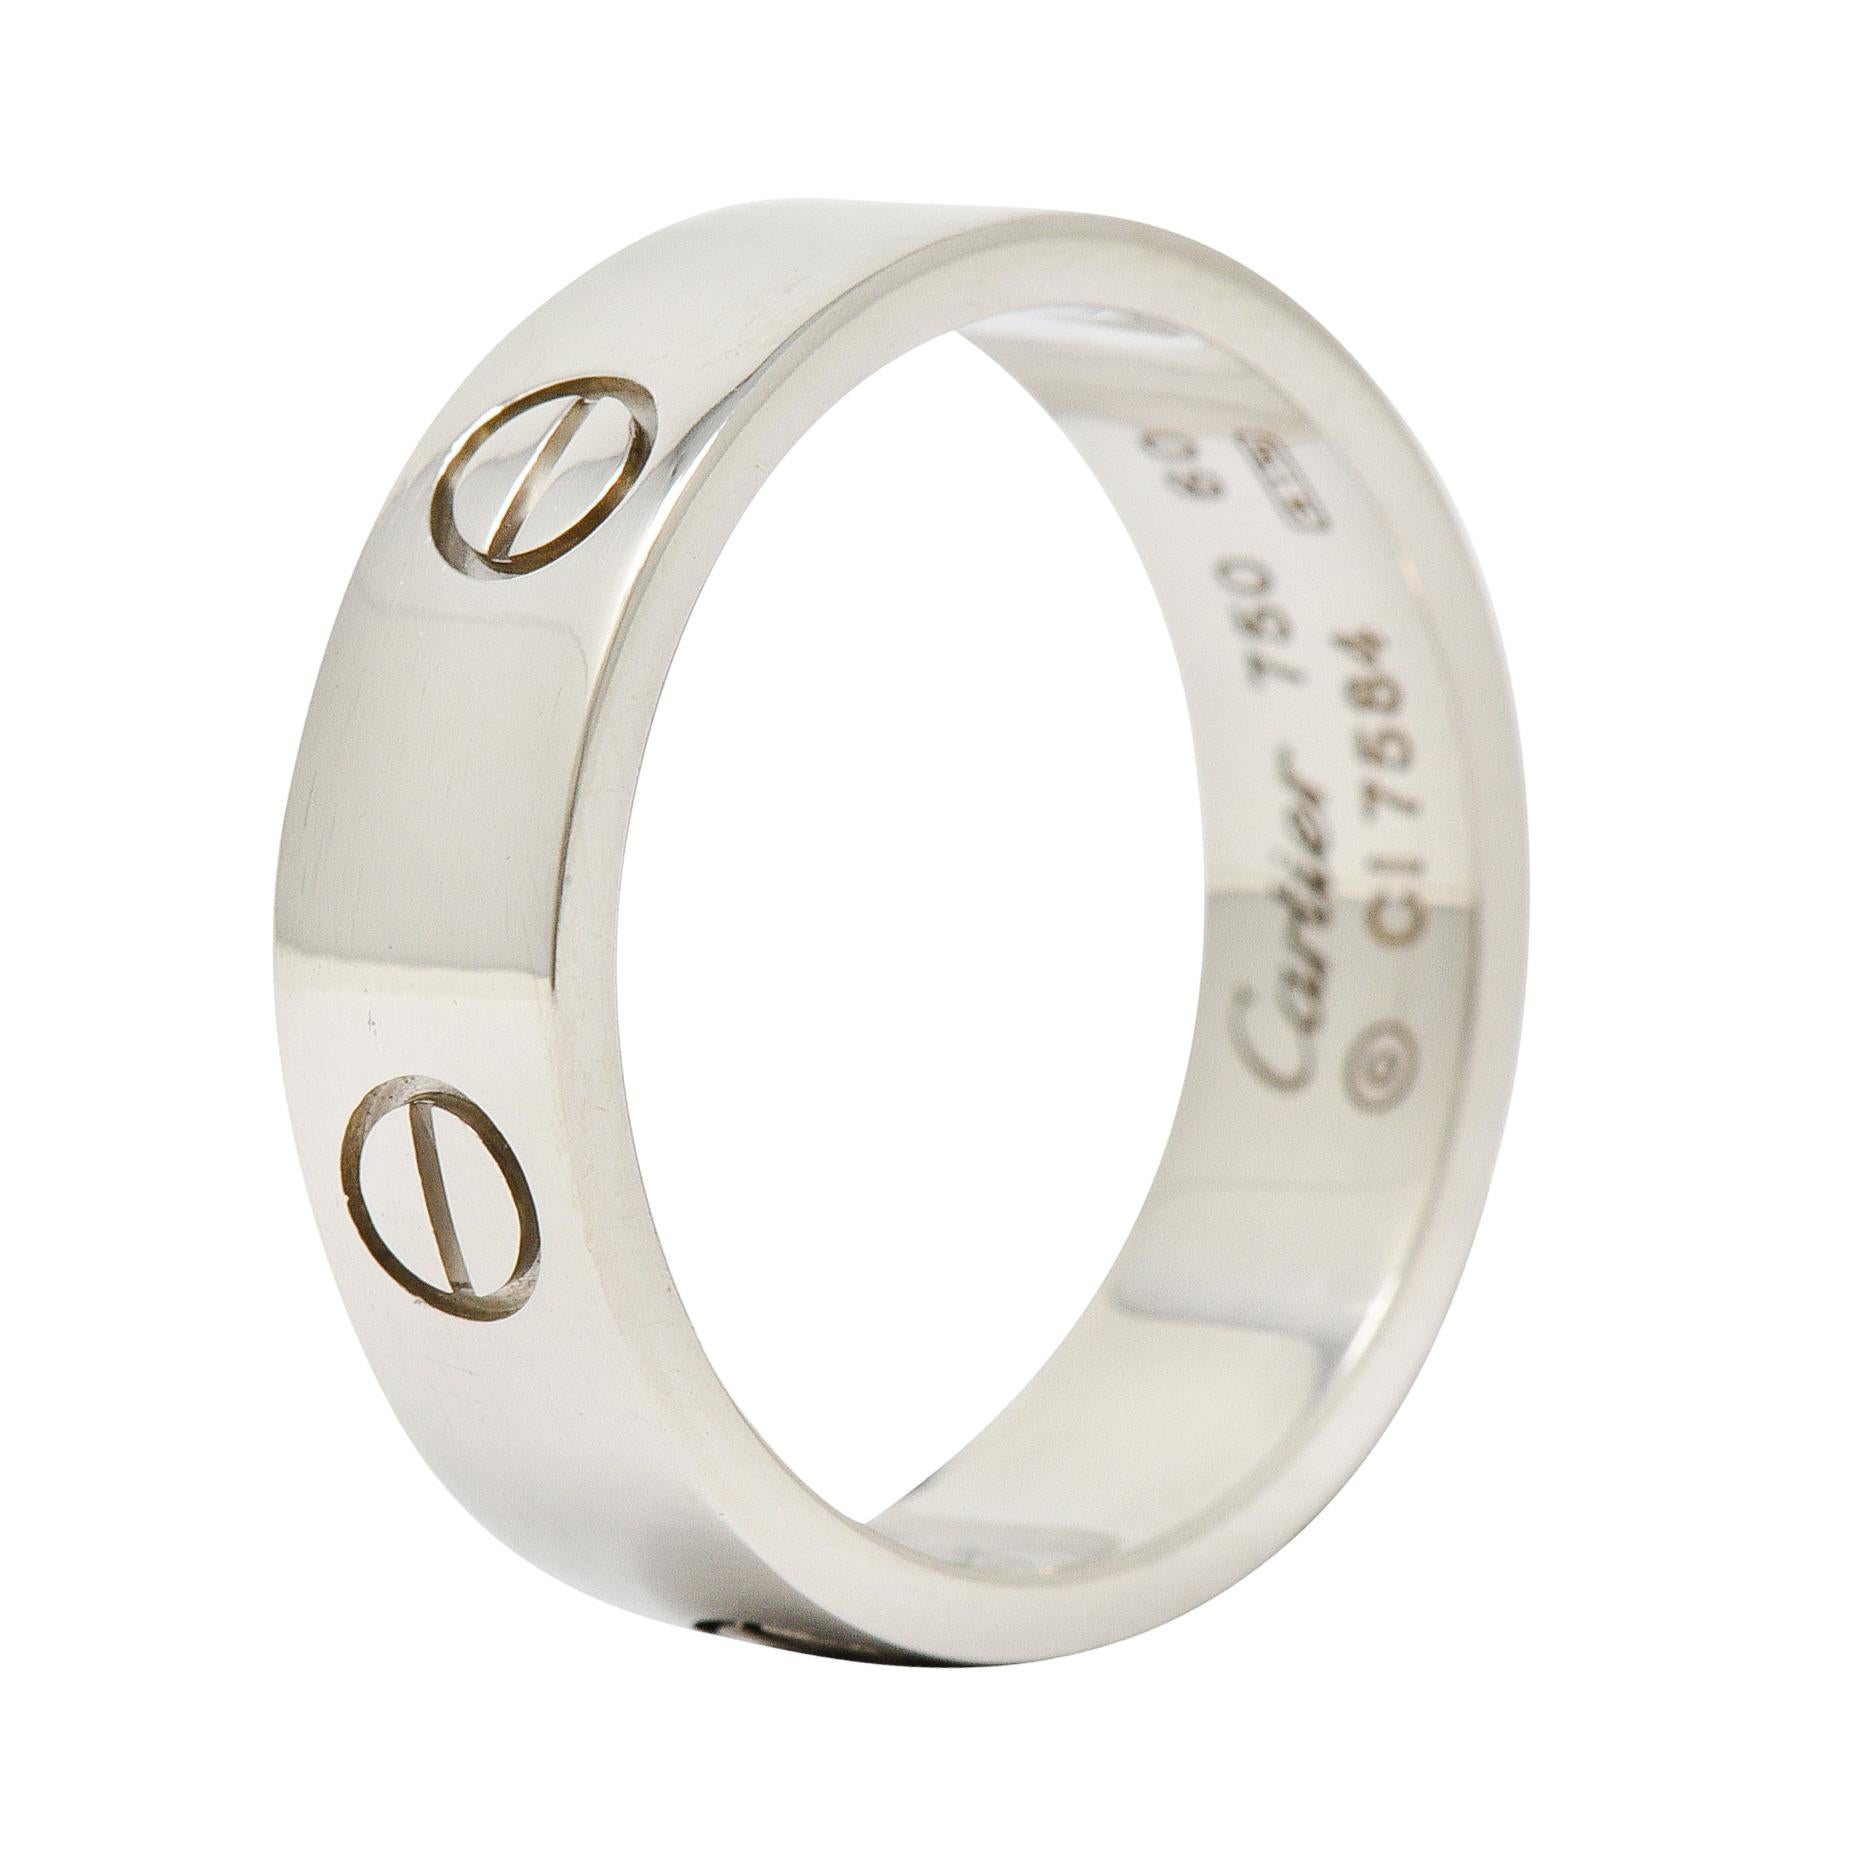 Wide band ring is deeply engraved with the iconic screwhead motif - fully around band

With a brightly polished finish

Stamped AU750 for 18 karat gold

Numbered and fully signed Cartier

From the coveted Love collection

Stamped 60 for Ring Size: 9